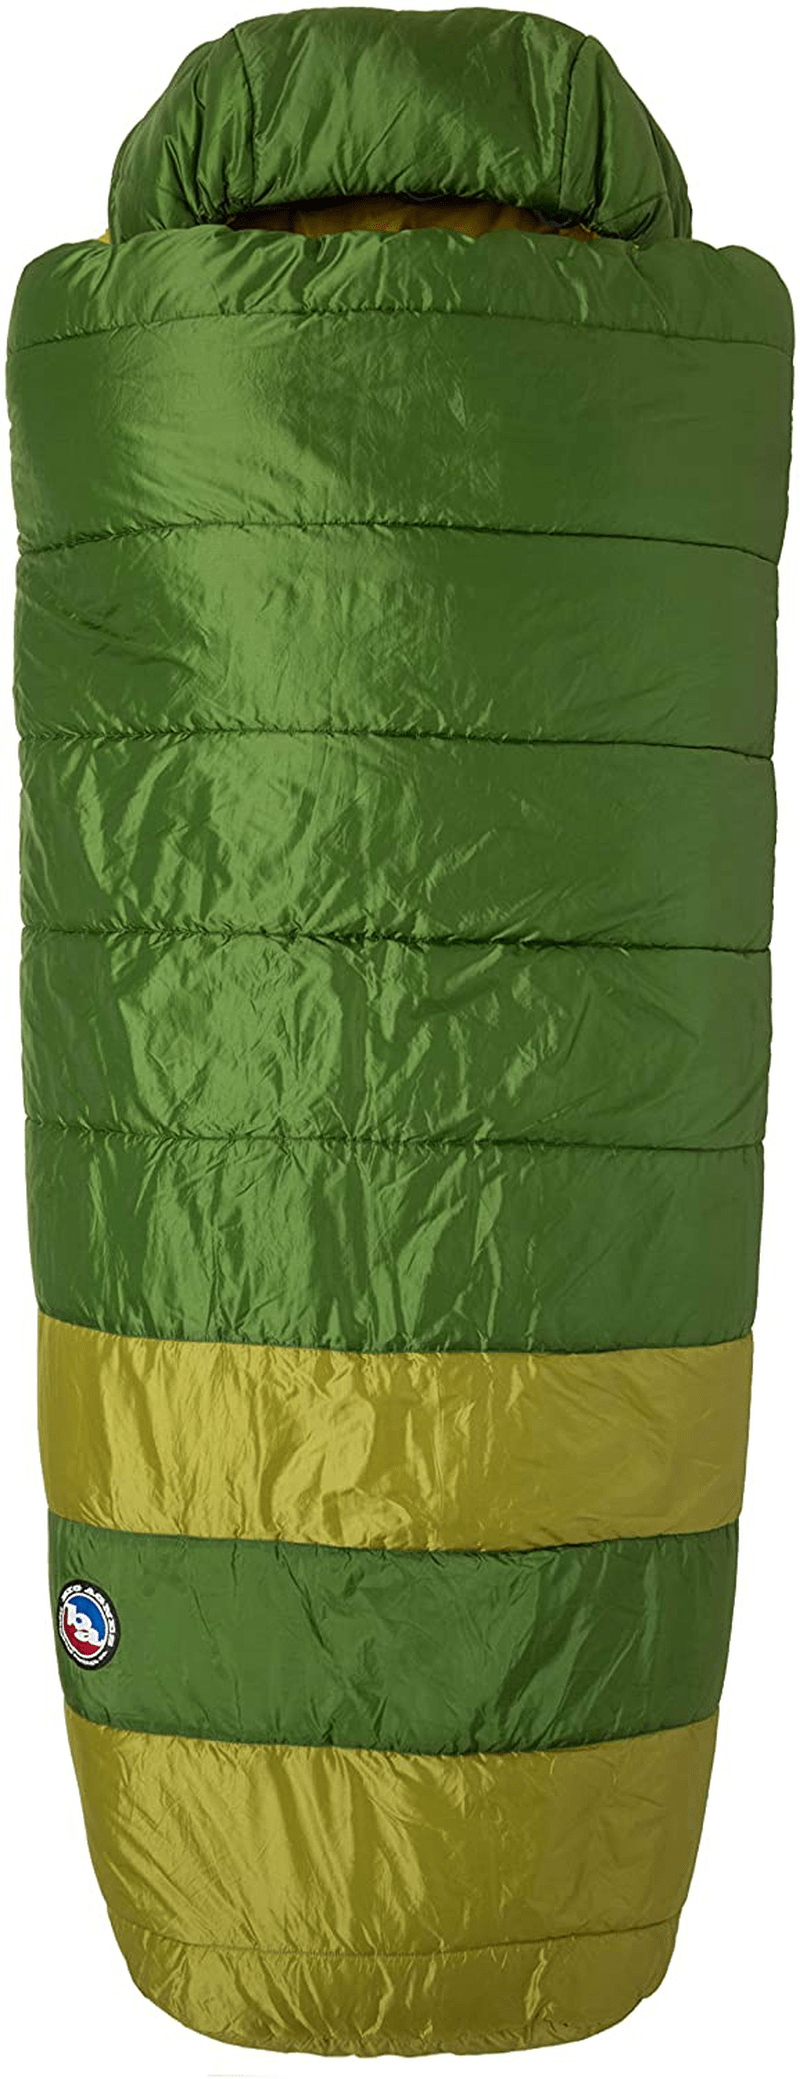 Big Agnes Echo Park Synthetic Sleeping Bag with Fireline Max Insulation